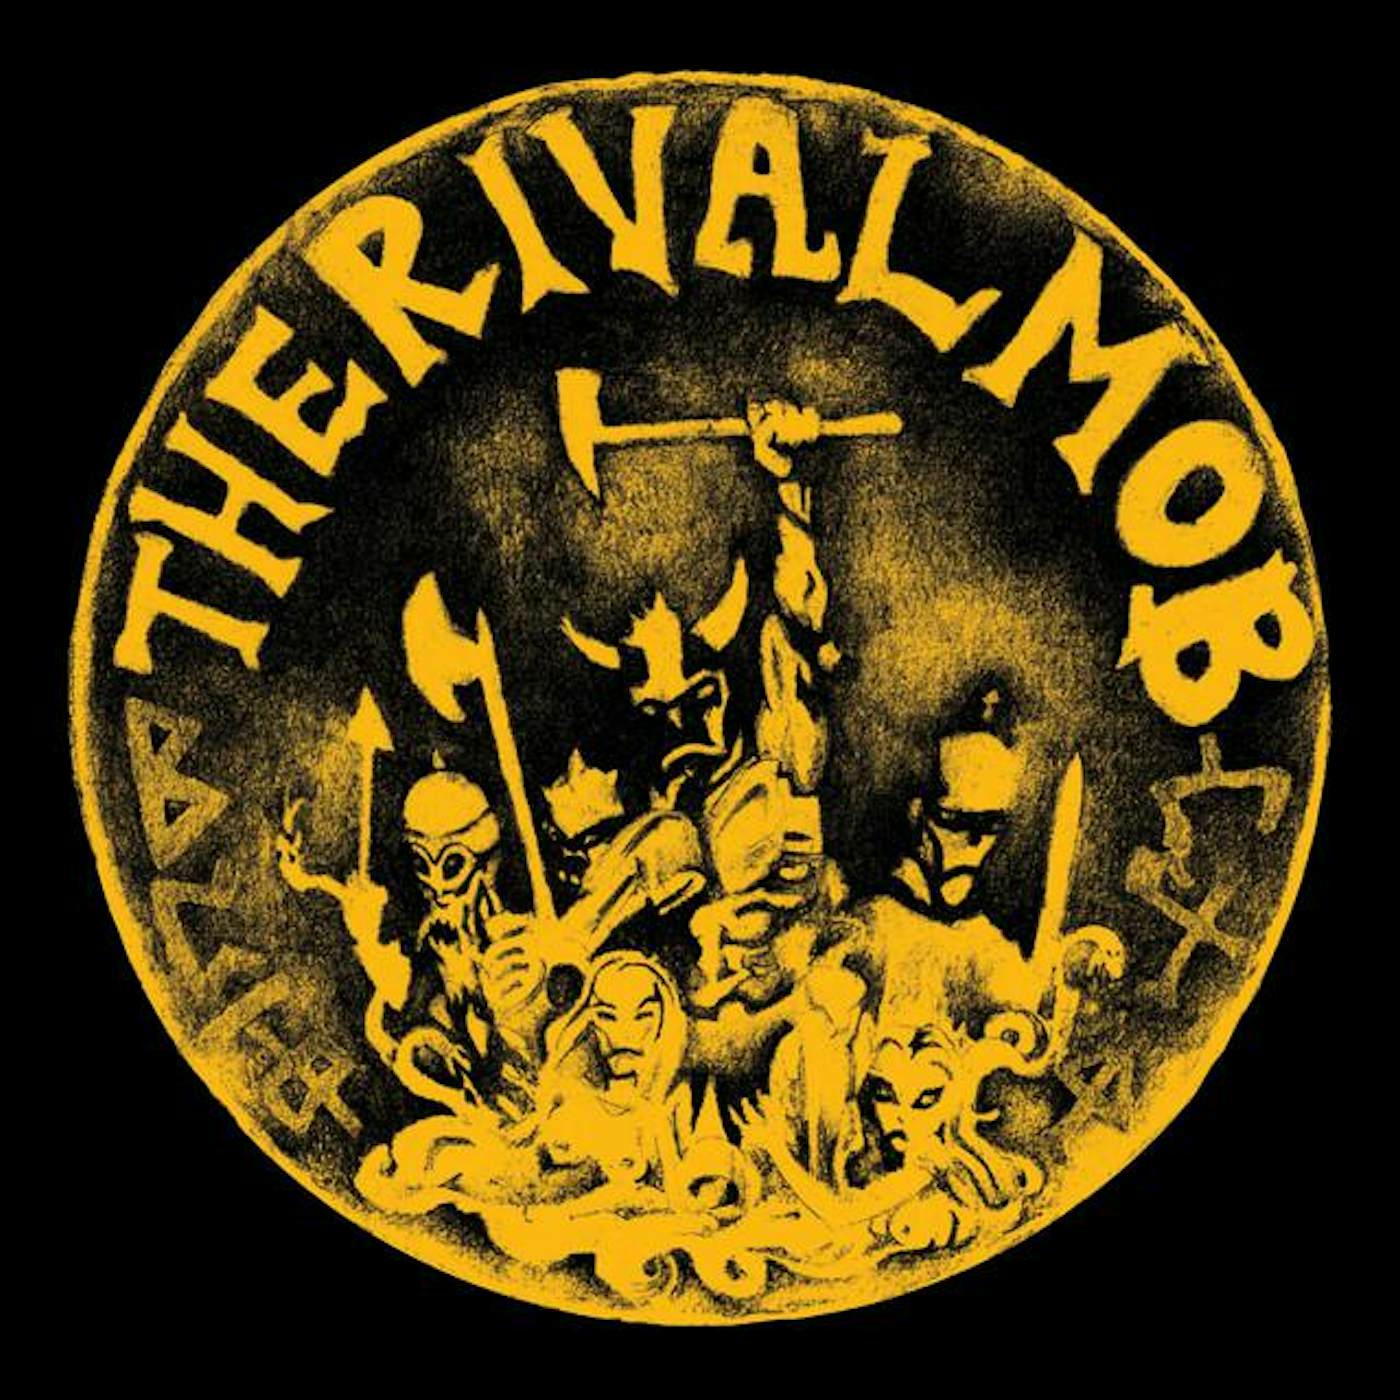 The Rival Mob